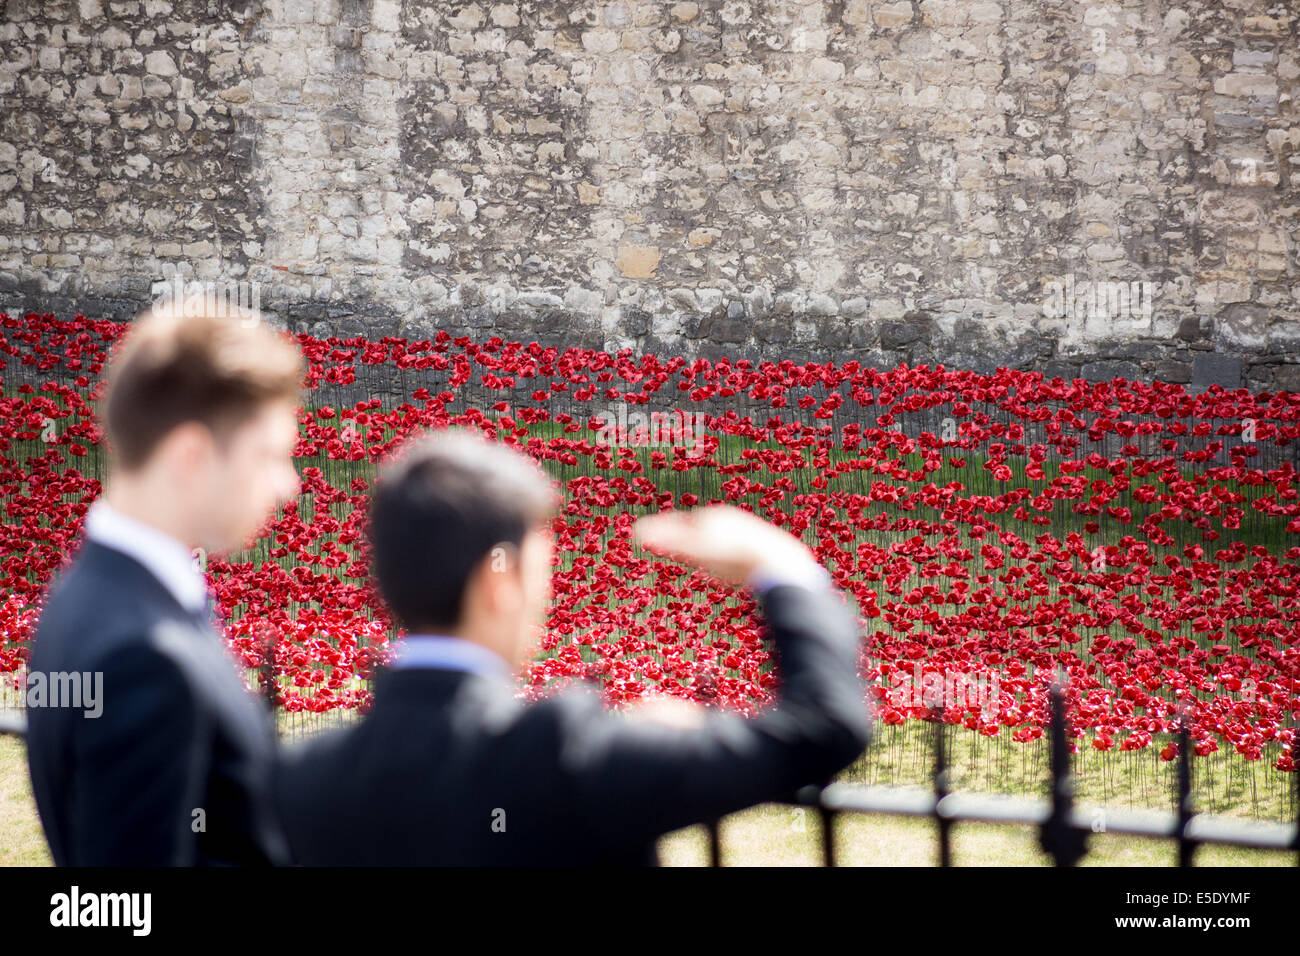 London, UK. 29th July, 2014. Ceramic poppies planted at Tower of London to mark World War I deaths Credit:  Guy Corbishley/Alamy Live News Stock Photo